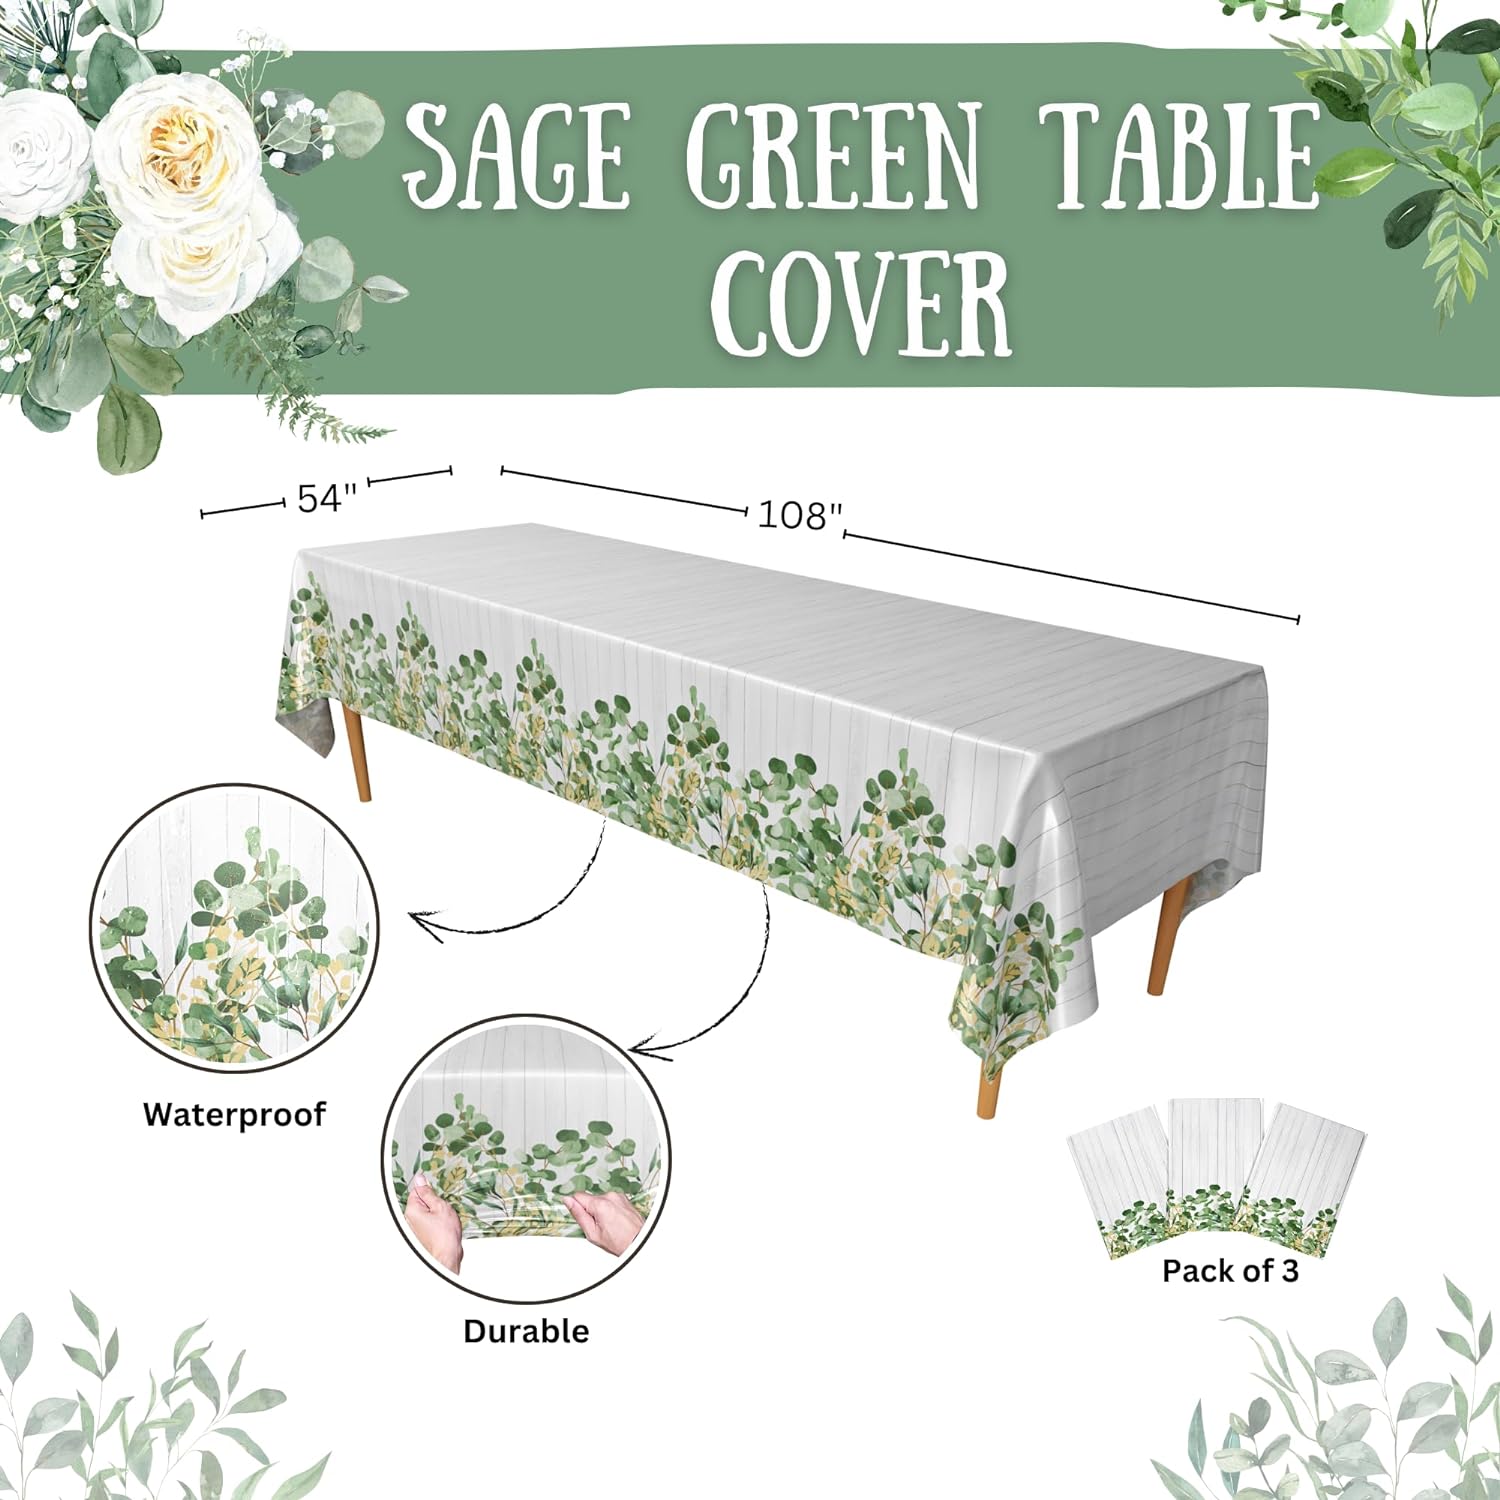 Sage Green Table Cover (Pack of 3) - 54"x108" XL